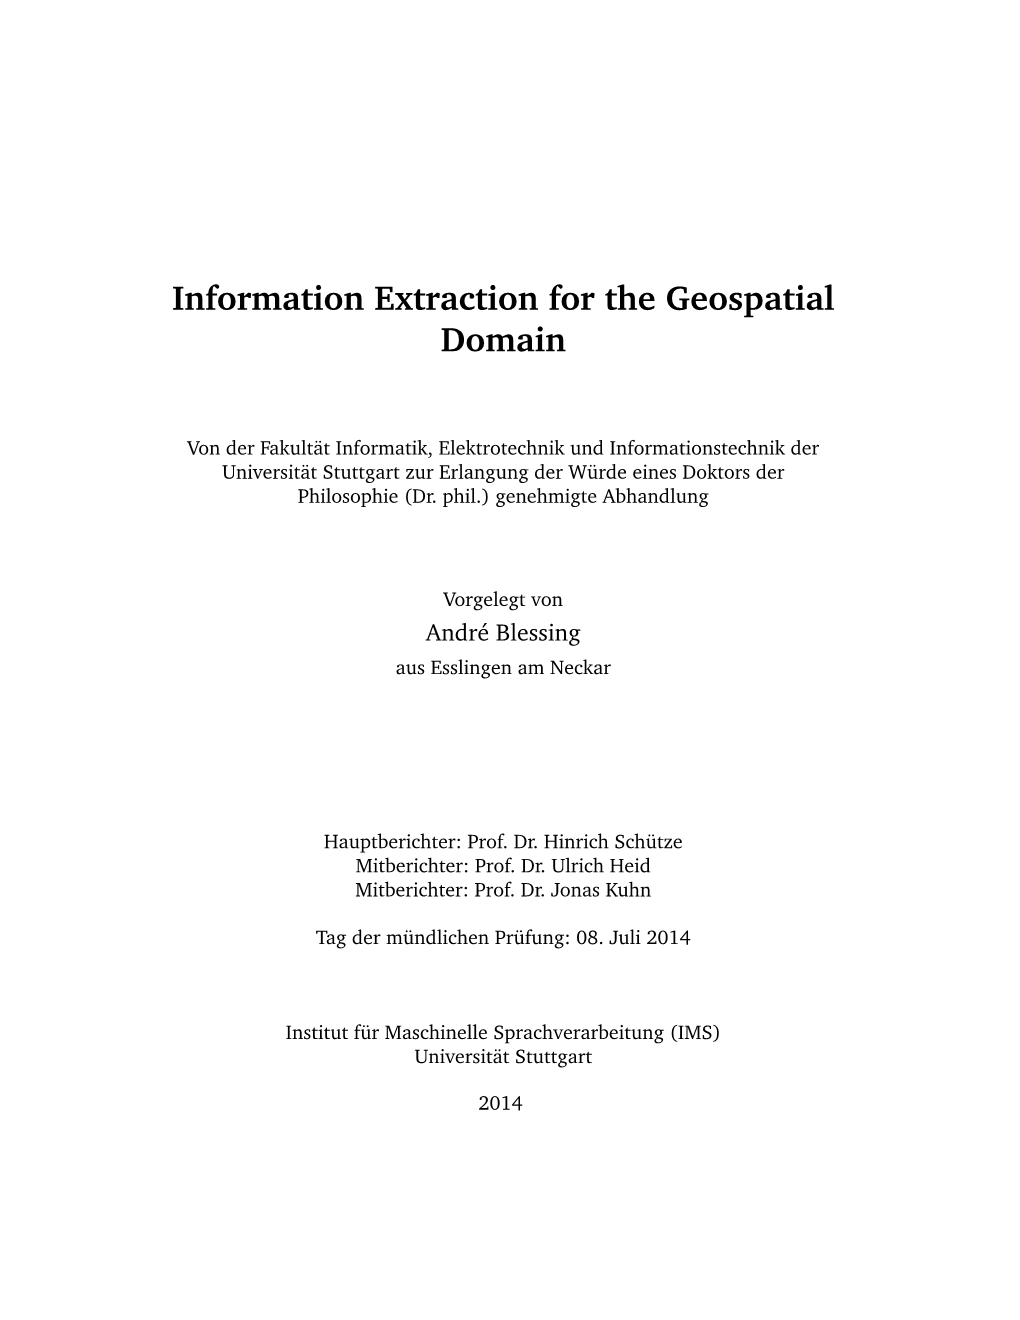 Information Extraction for the Geospatial Domain